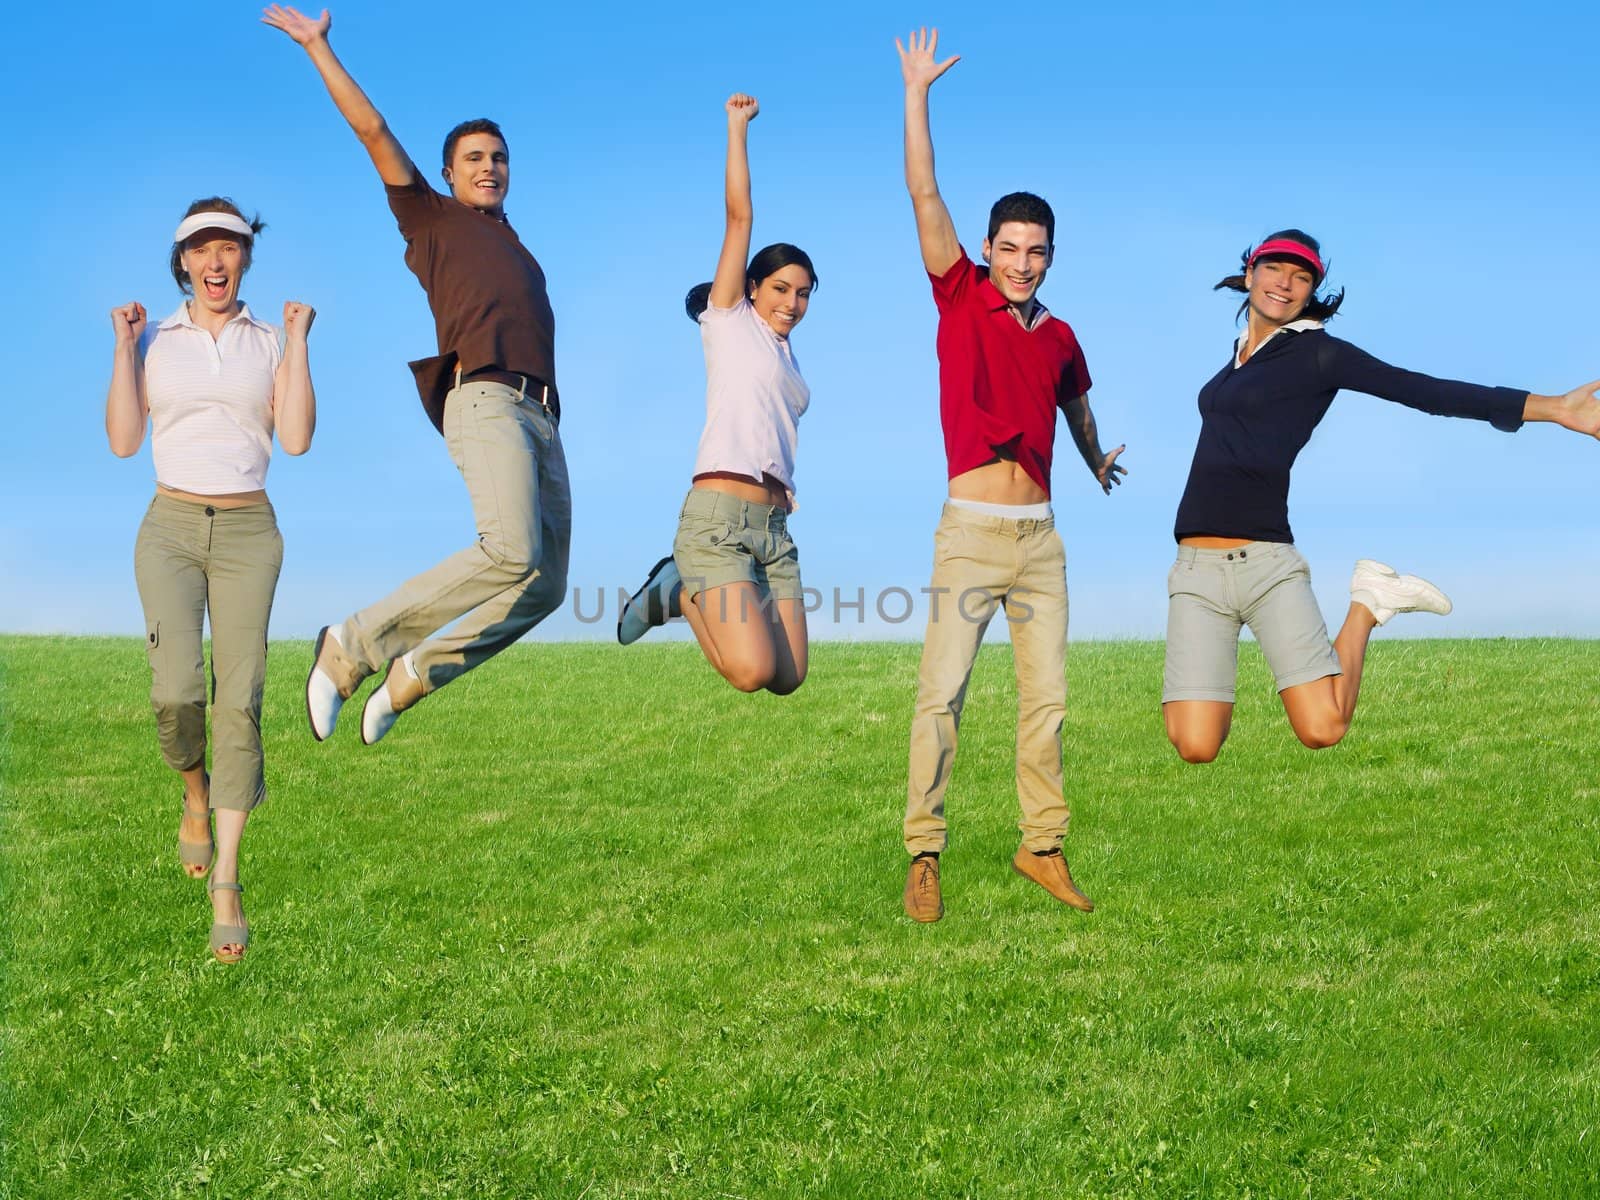 Jumping young people happy group in meadow blue sky outdoor